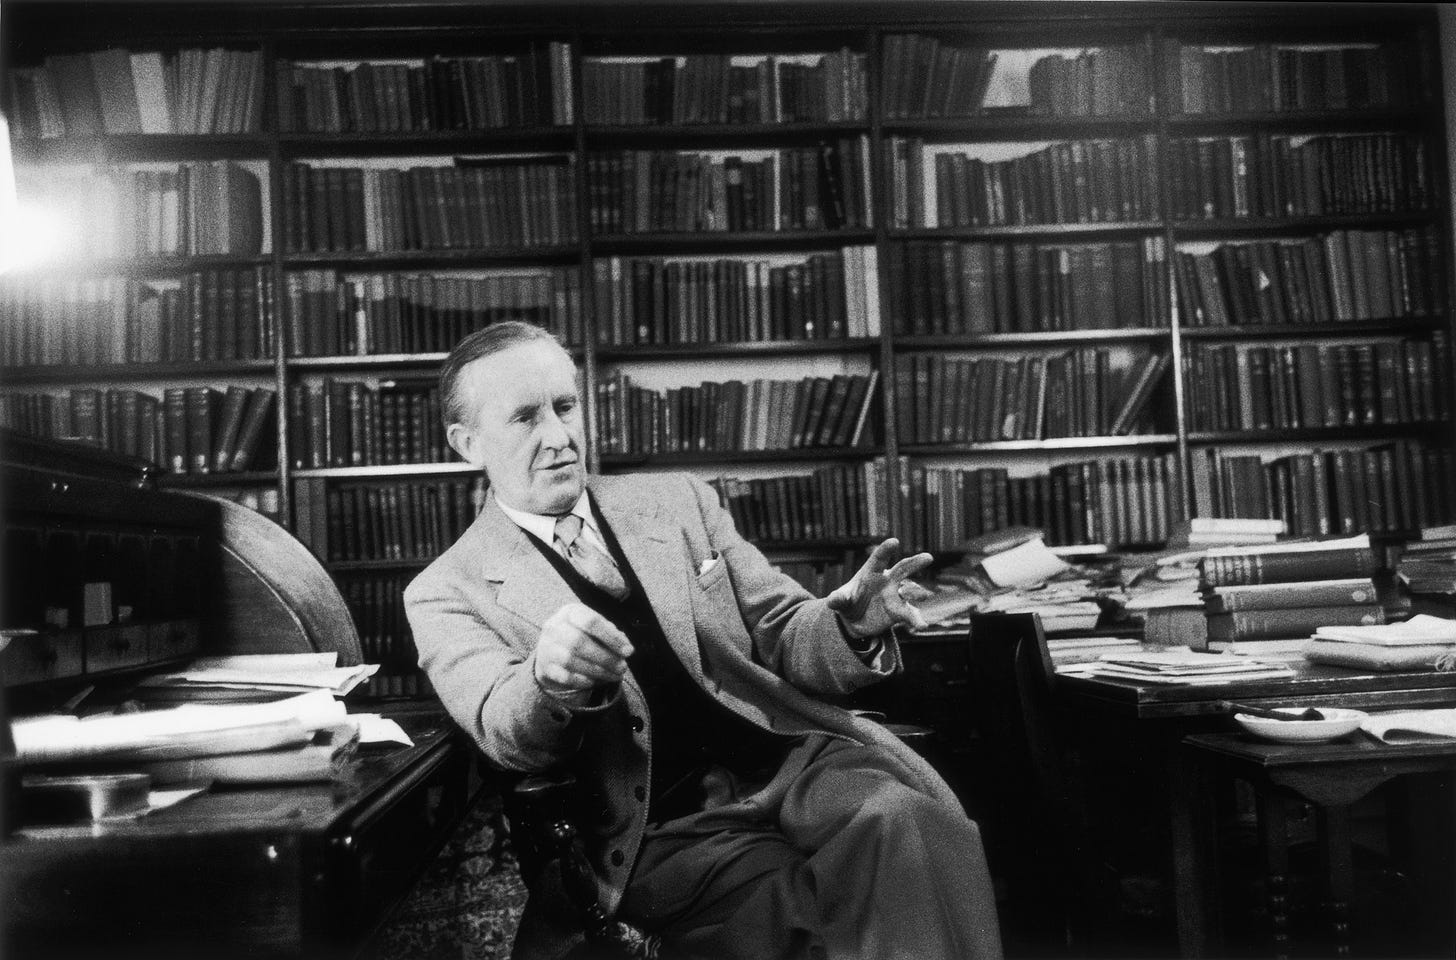 Tolkien talking with hands outstretched 